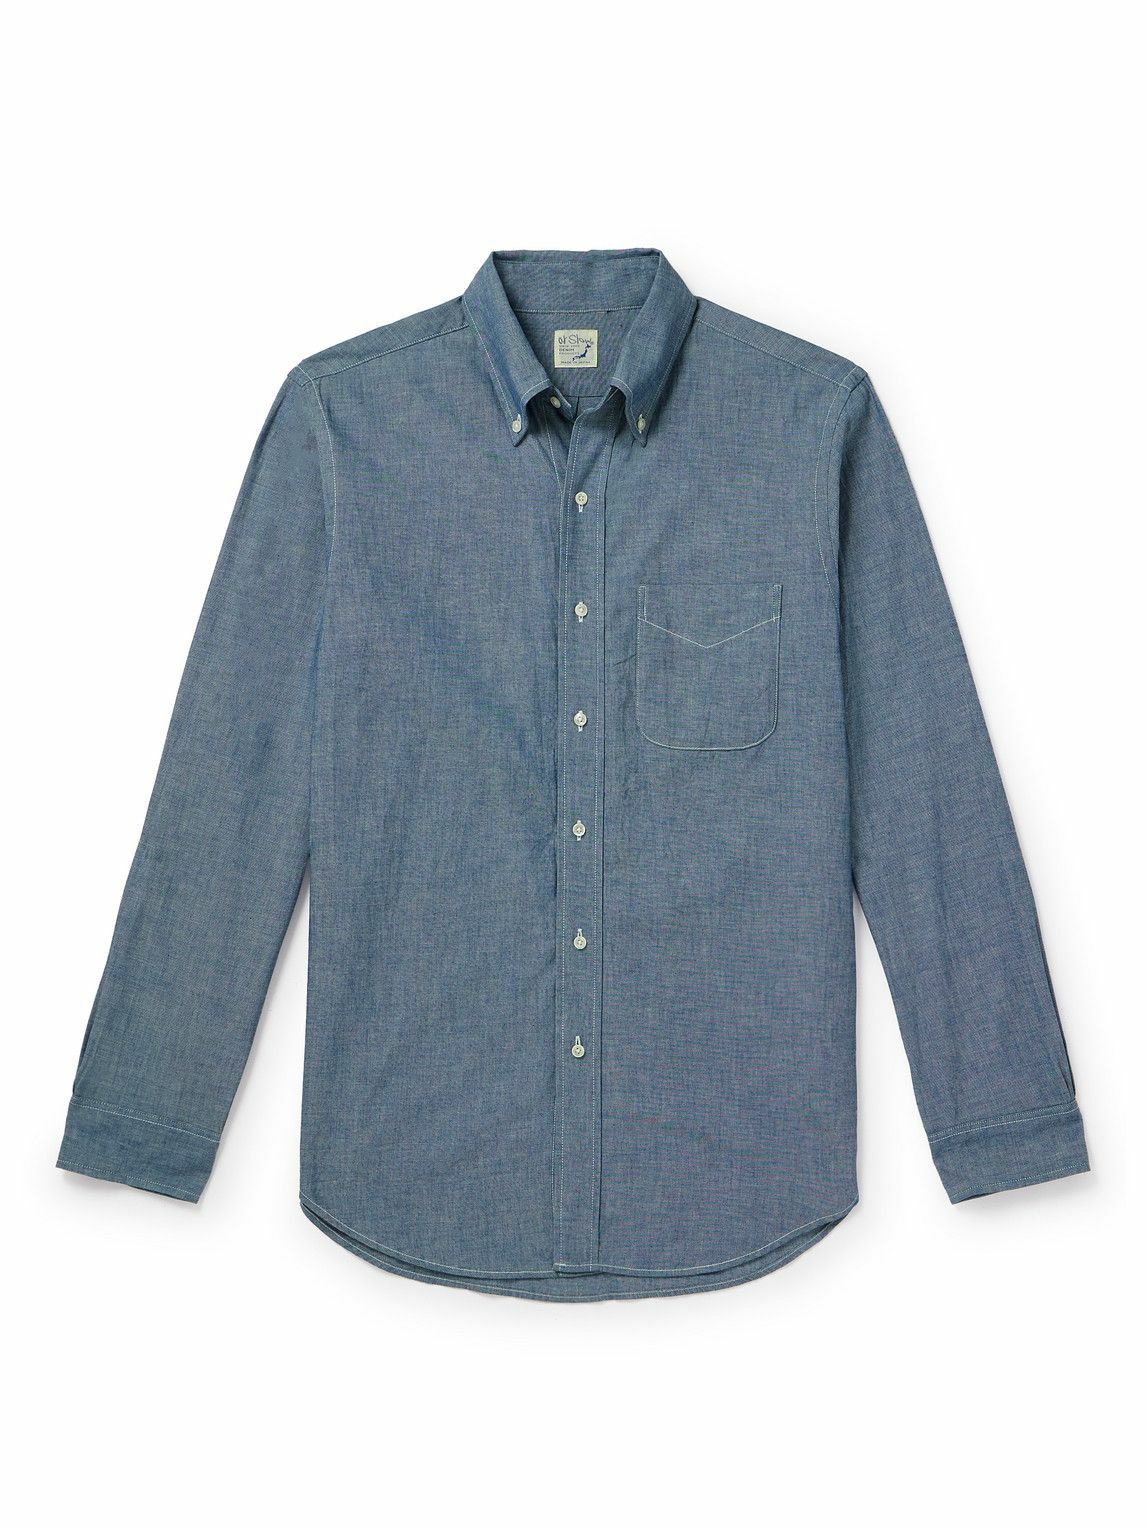 OrSlow - Button-Down Collar Cotton-Chambray Shirt - Blue orSlow